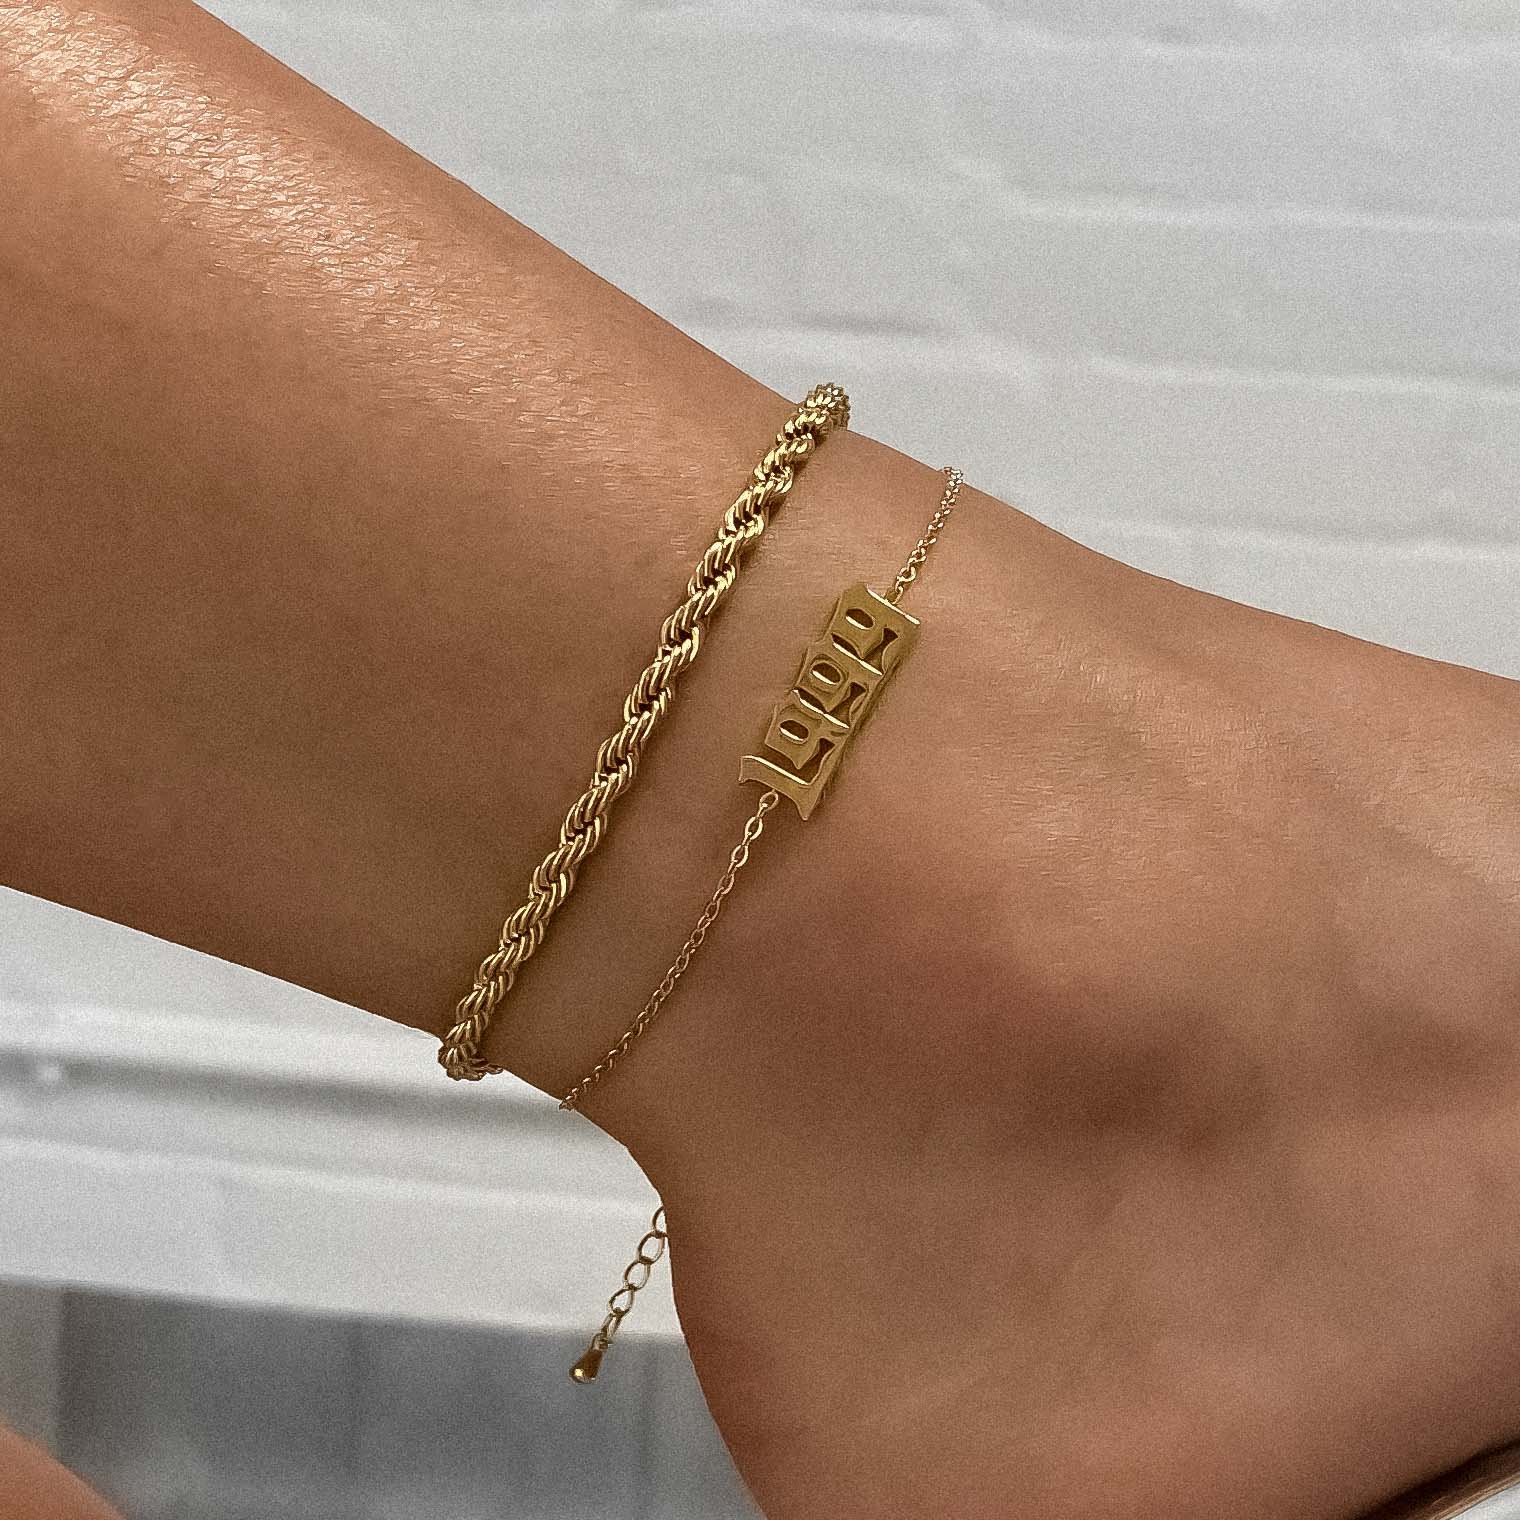 Woman’s ankle sporting a 1999 gold birth year anklet and rope chain anklet